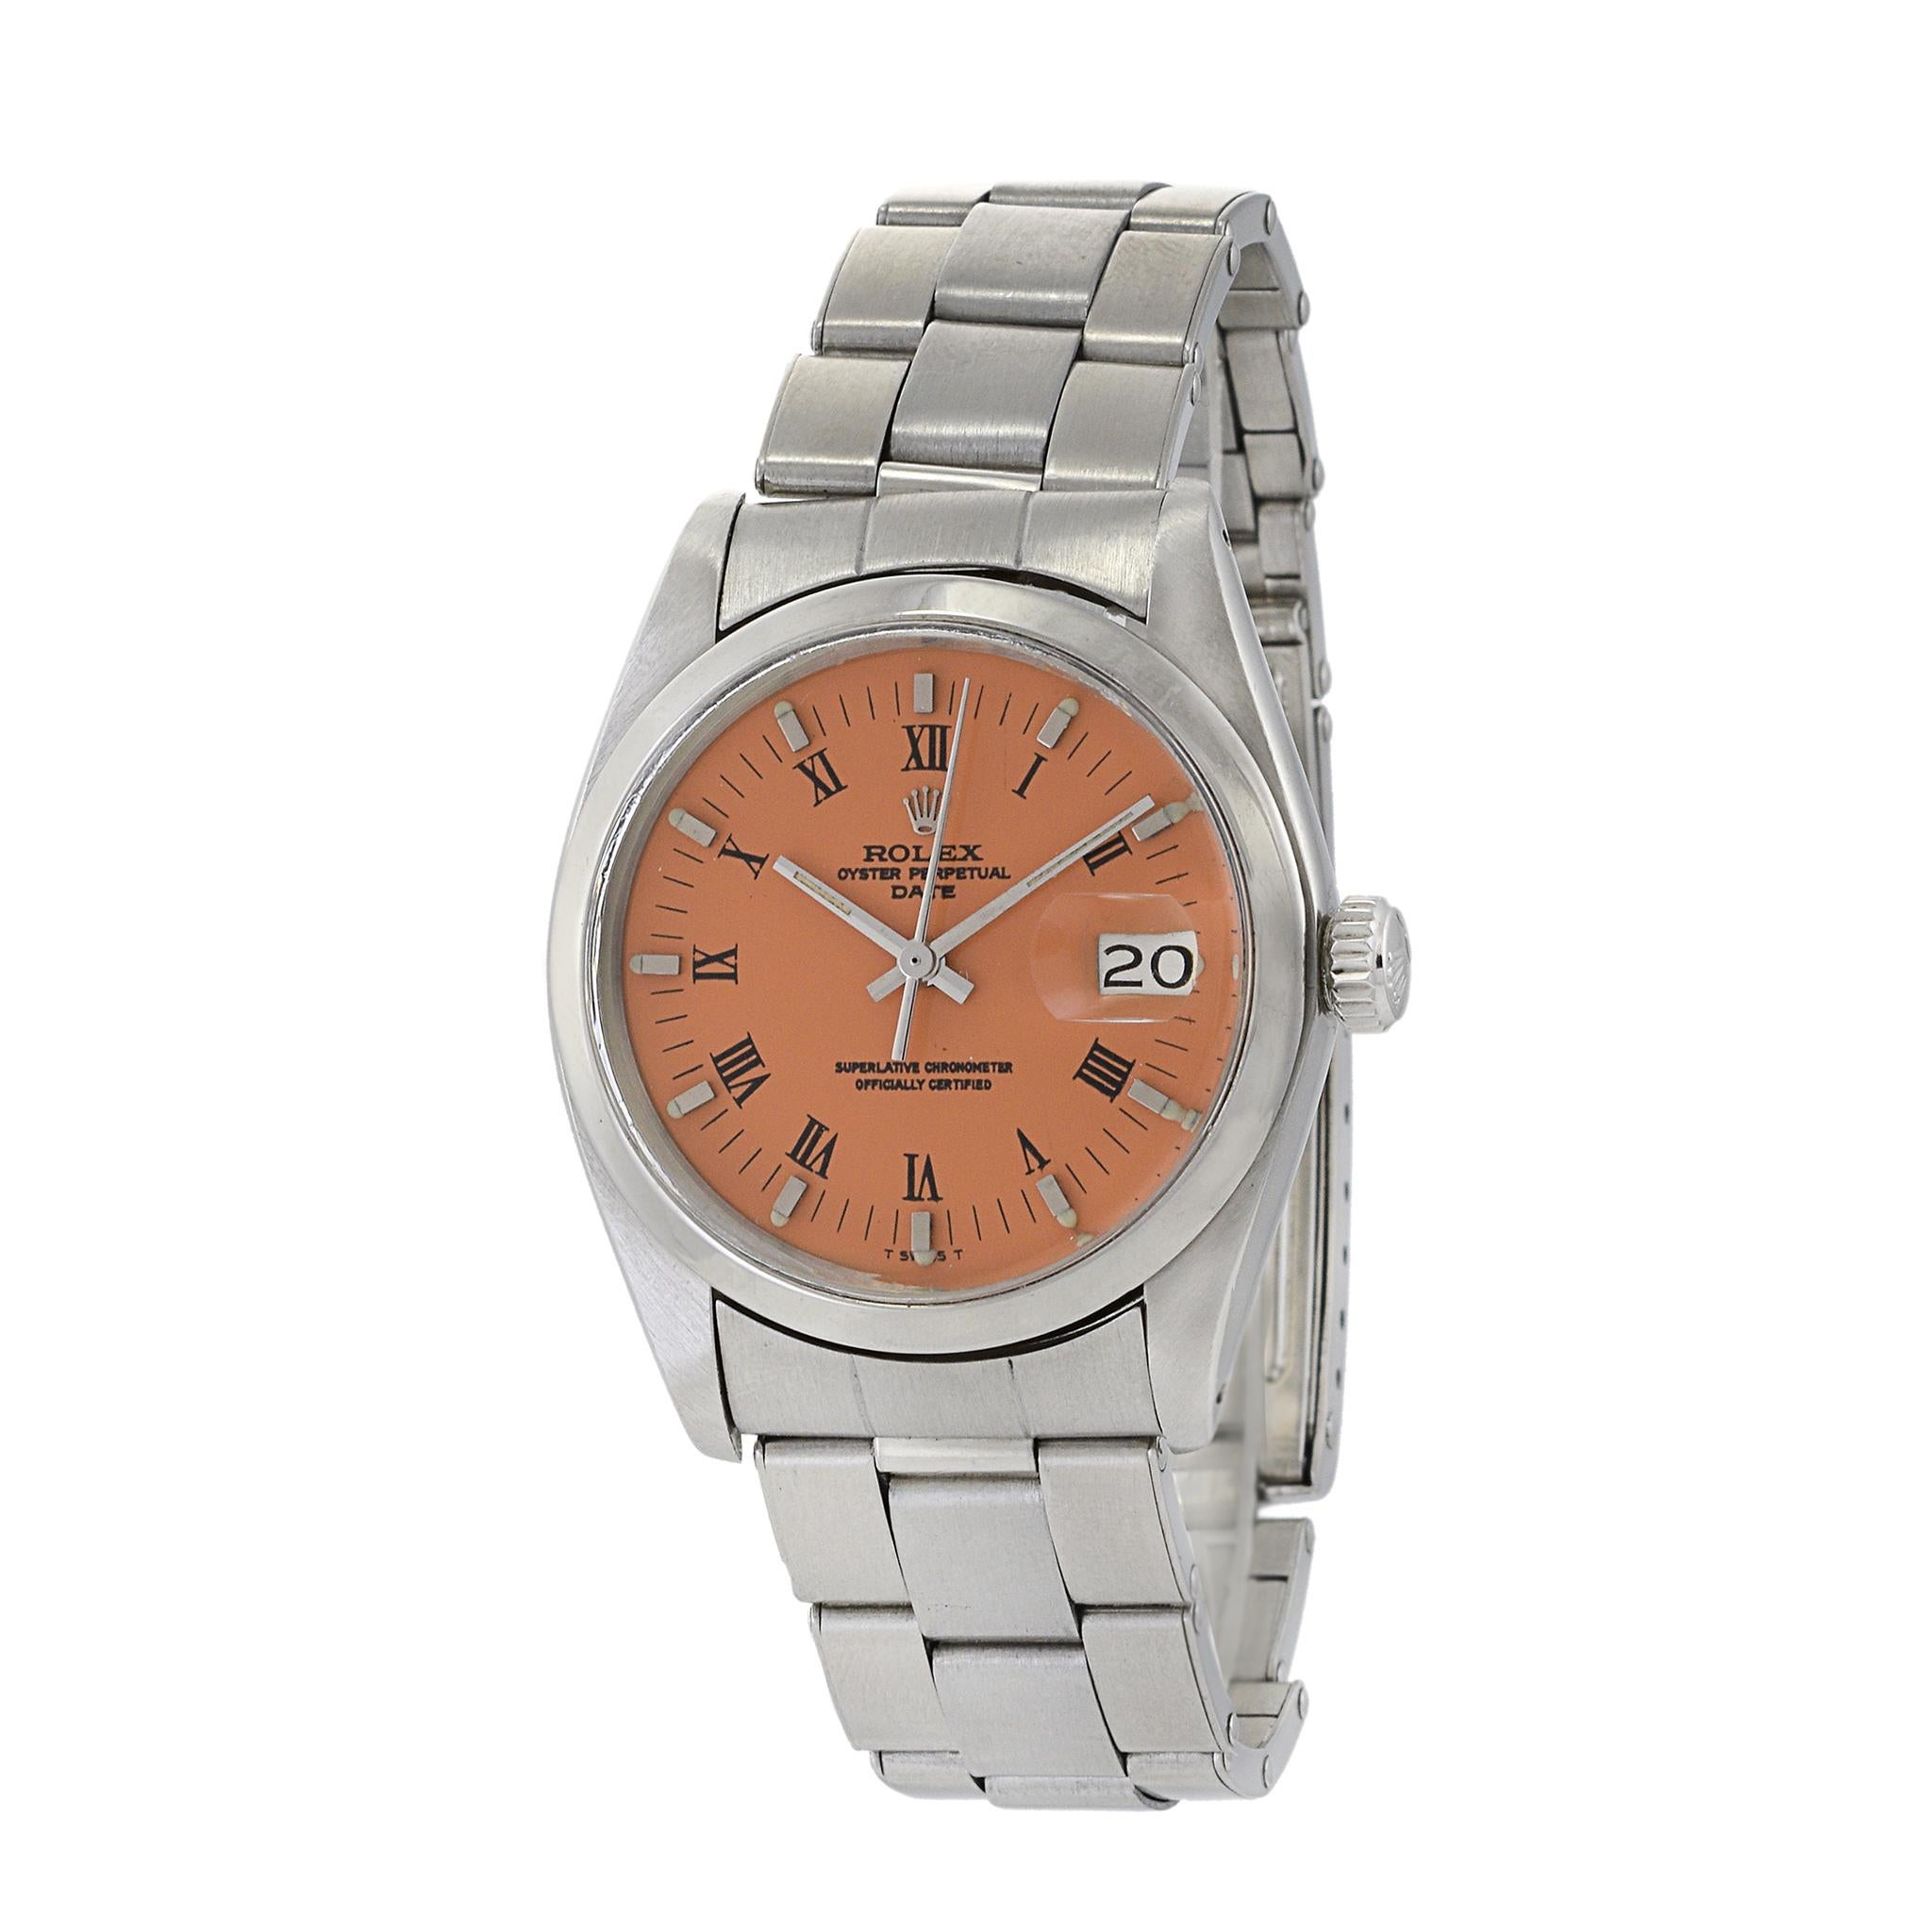 This vintage Rolex Date reference 1500 is from 1973 and remains a timeless classic suitable for both men and women. It features an automatic movement, ensuring reliable timekeeping. The 34mm stainless steel case with a smooth bezel and acrylic